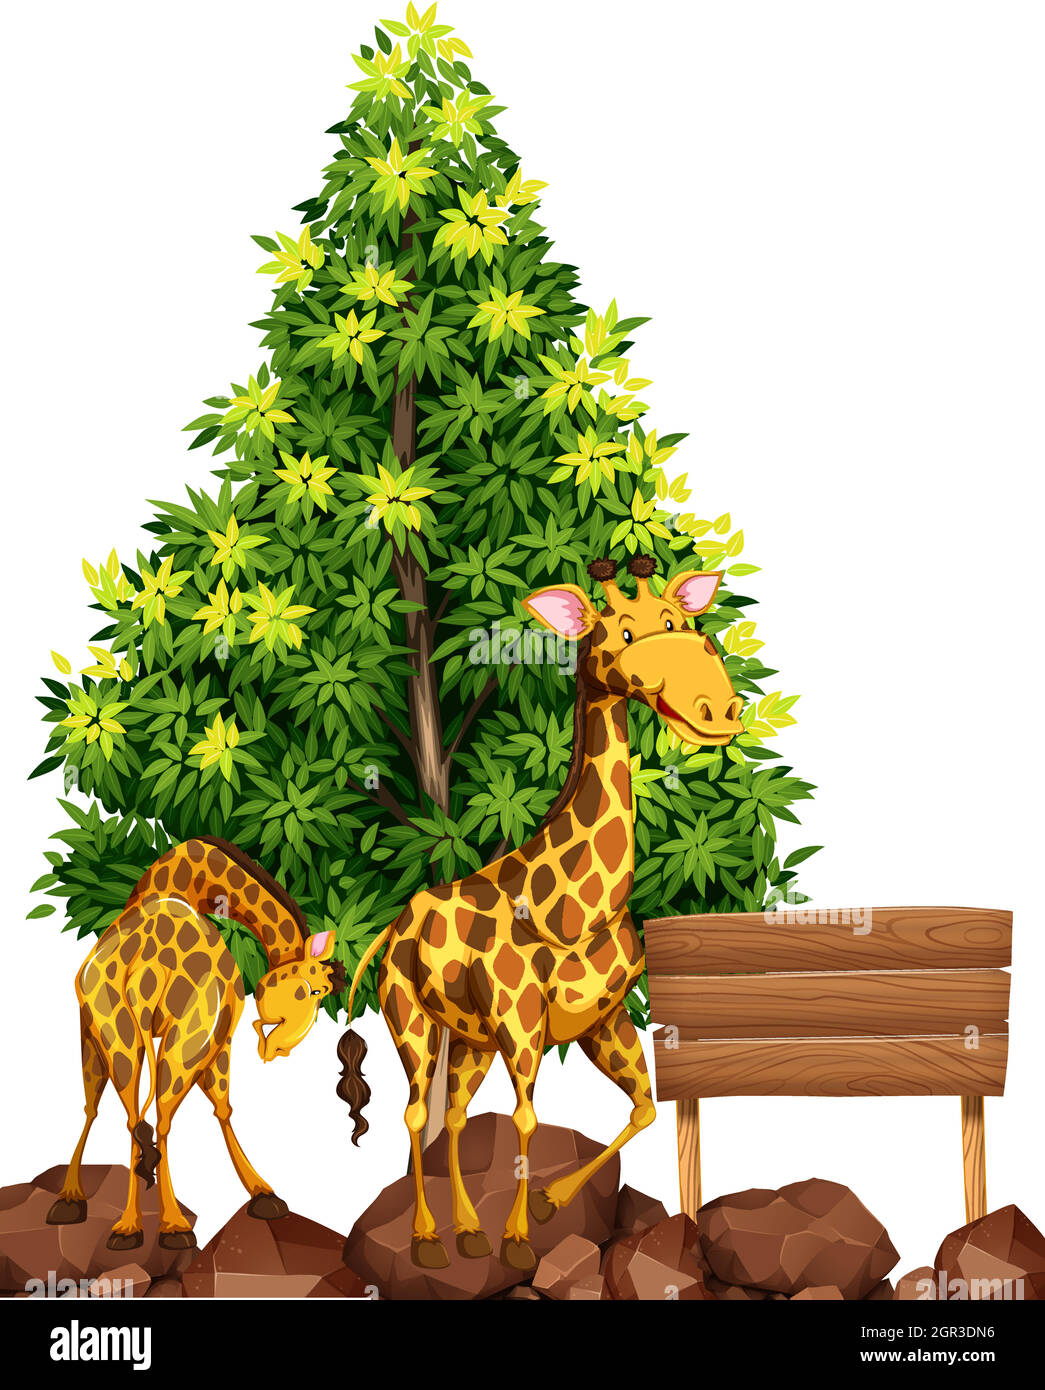 Two giraffes by the wooden sign Stock Vector